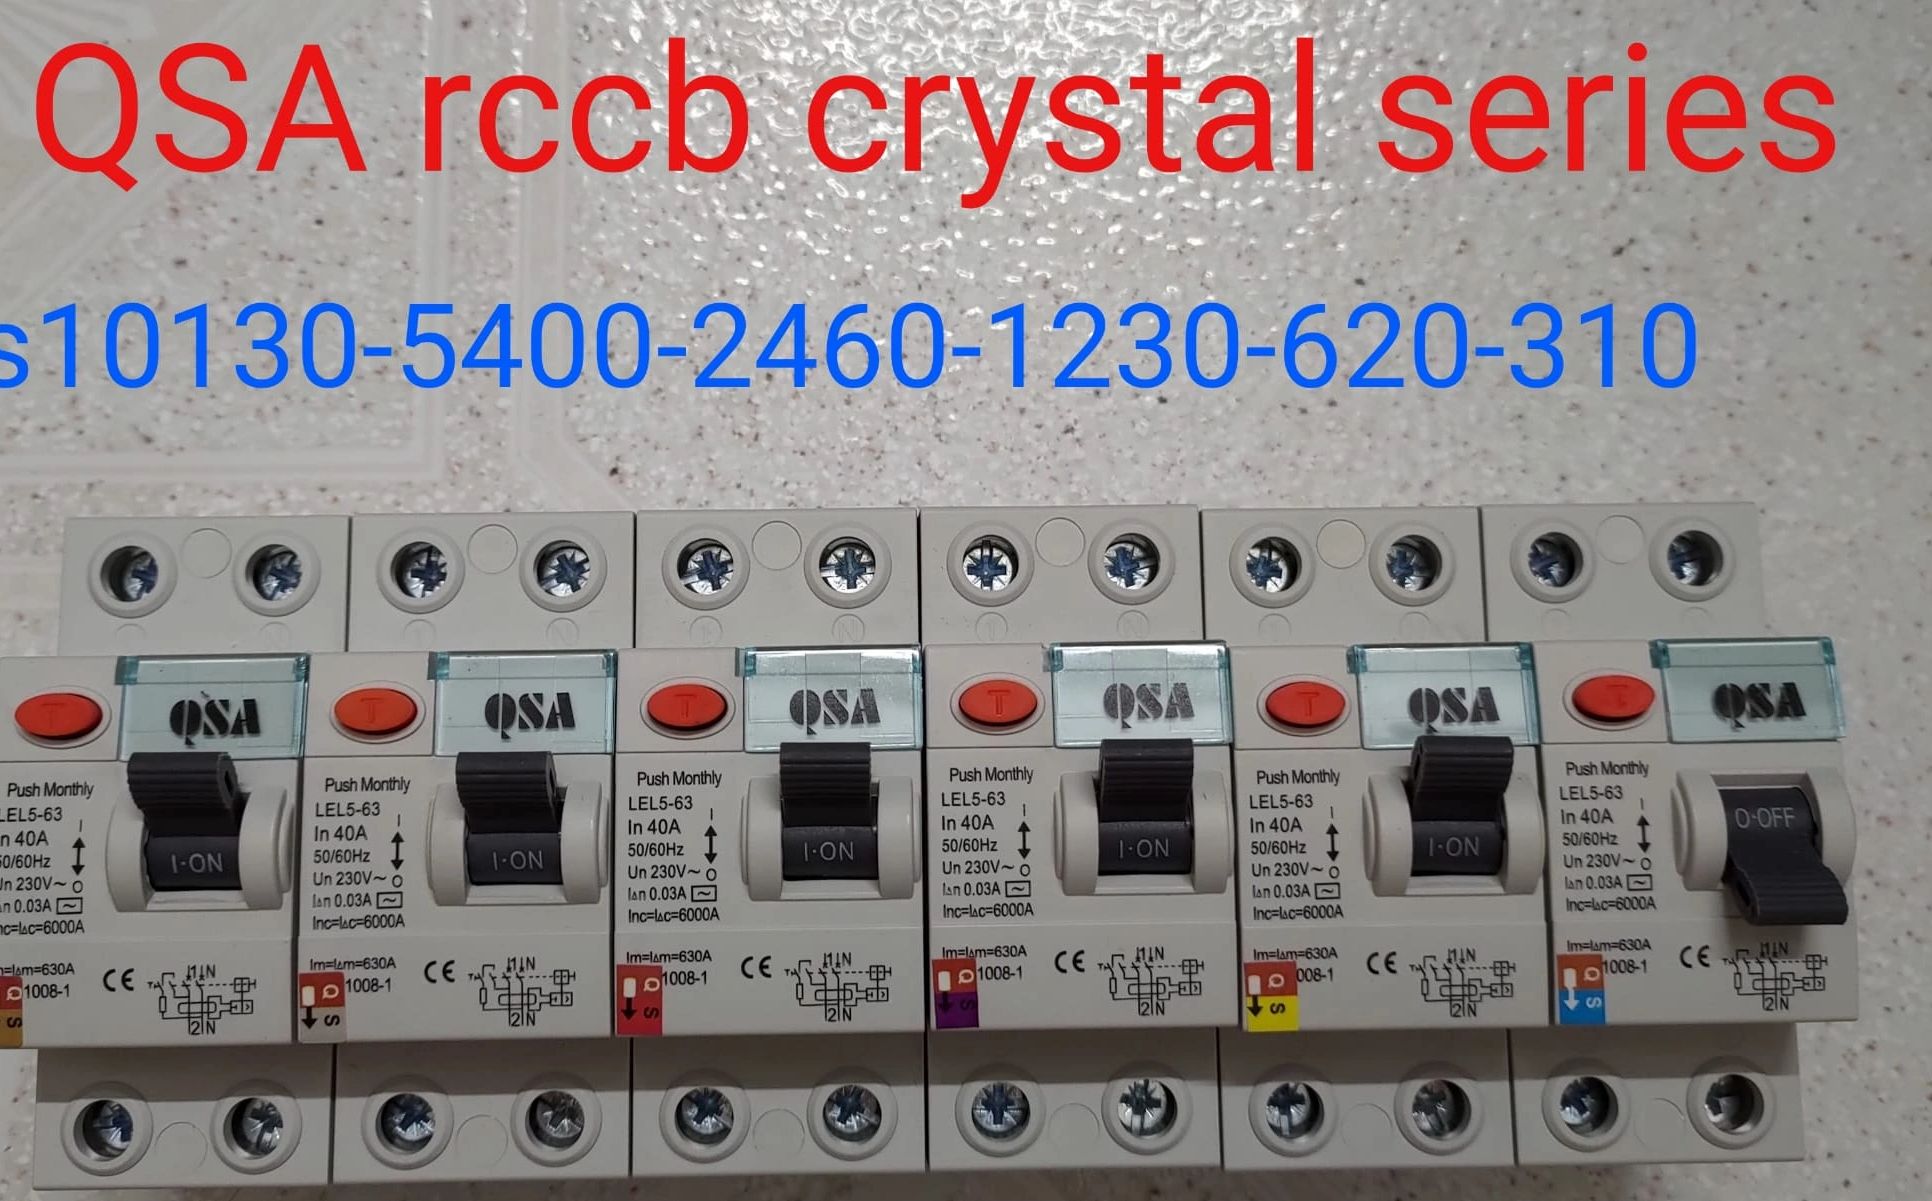 rccb crystal series retail price per pcs
mcb case  retail price started from crystal violet us1230